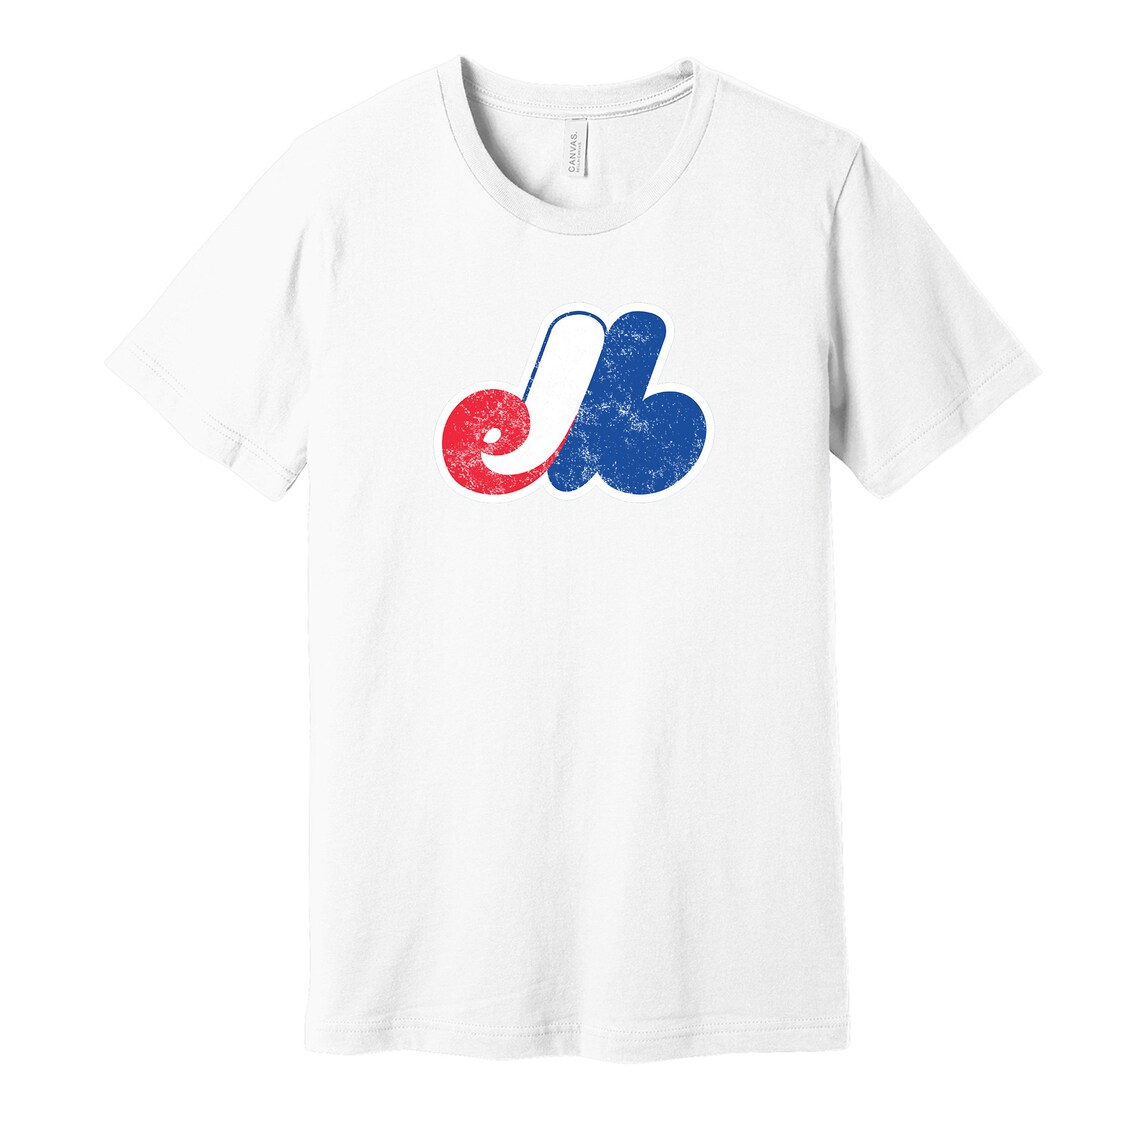 Montreal Expos Distressed Logo Shirt Defunct Sports Team | Etsy